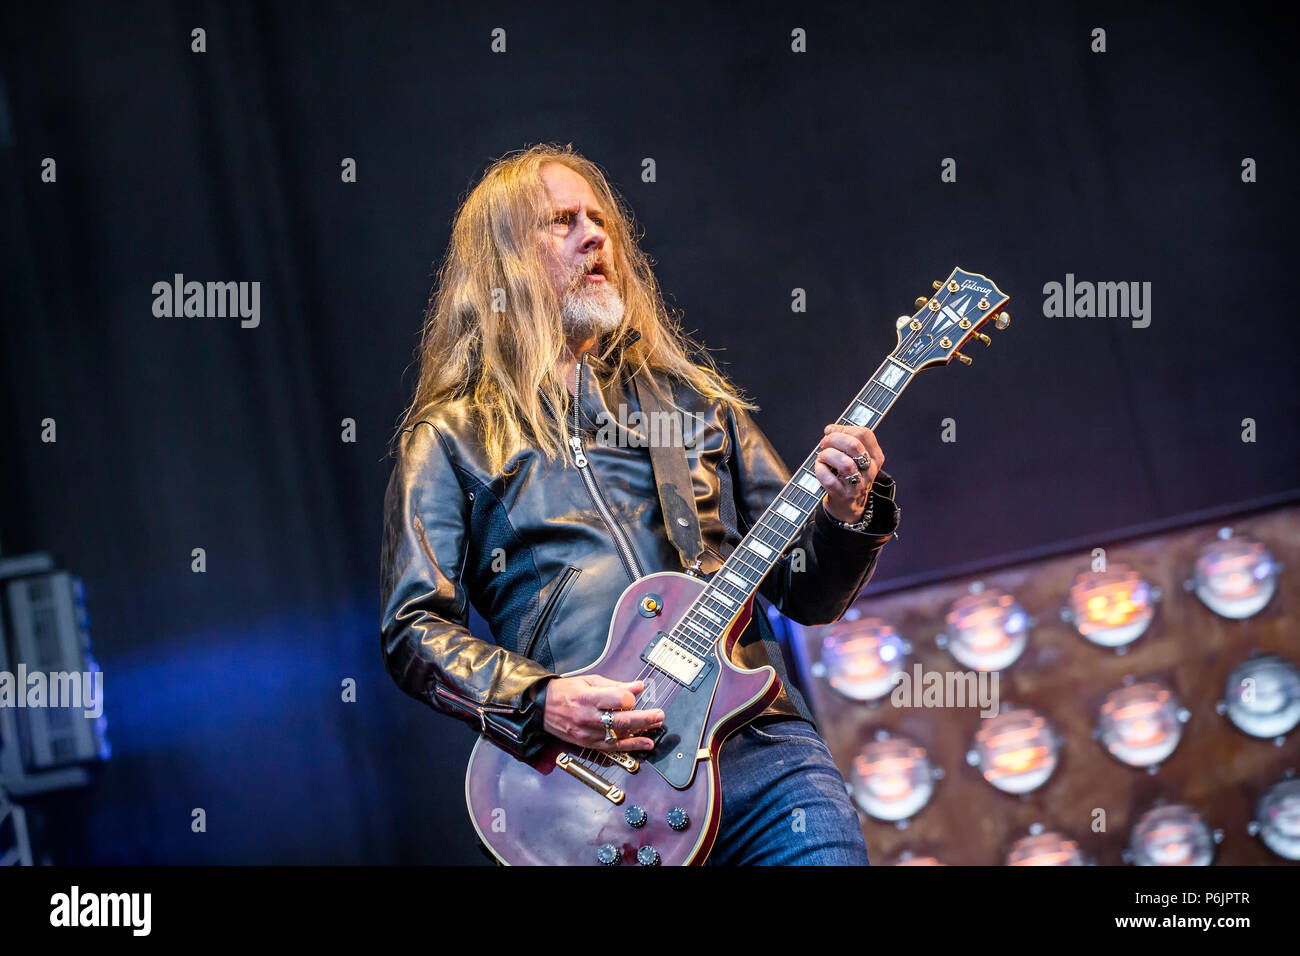 Norway, Halden - June 21, 2018. The American rock band Alice in Chains performs a live concert during the Norwegian music metal festival Tons of Rock 2018 in Halden. Here singer and guitarist Jerry Cantrell is seen live on stage. (Photo credit: Gonzales Photo - Terje Dokken). Stock Photo